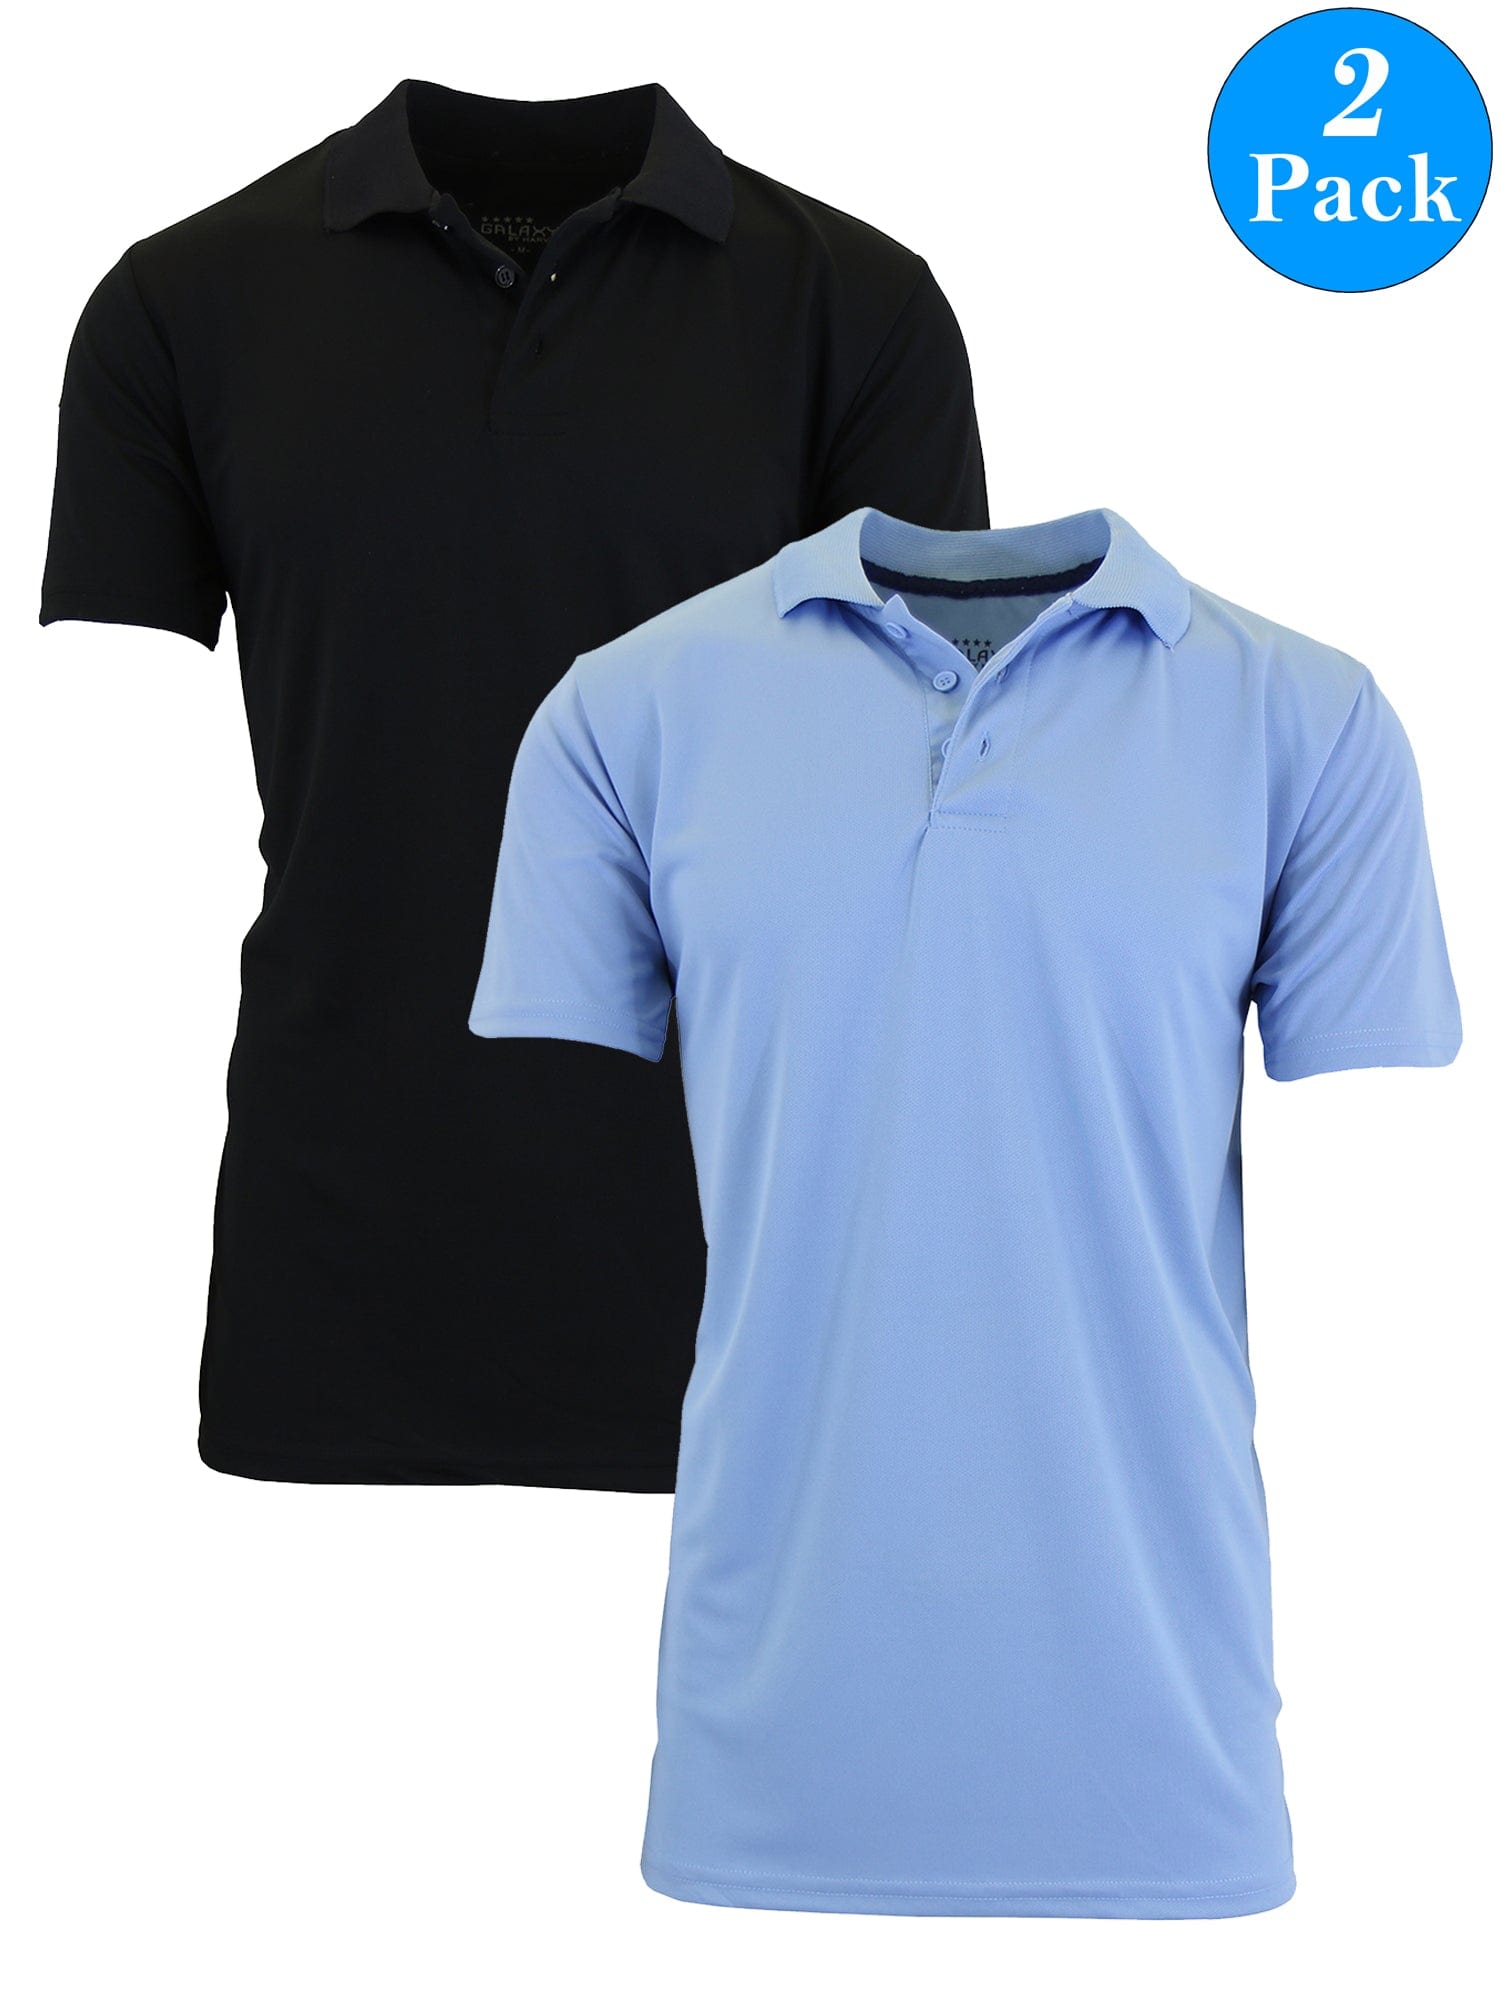 Men's Dry Fit Moisture-Wicking Polo Shirt (2-Pack) - GalaxybyHarvic